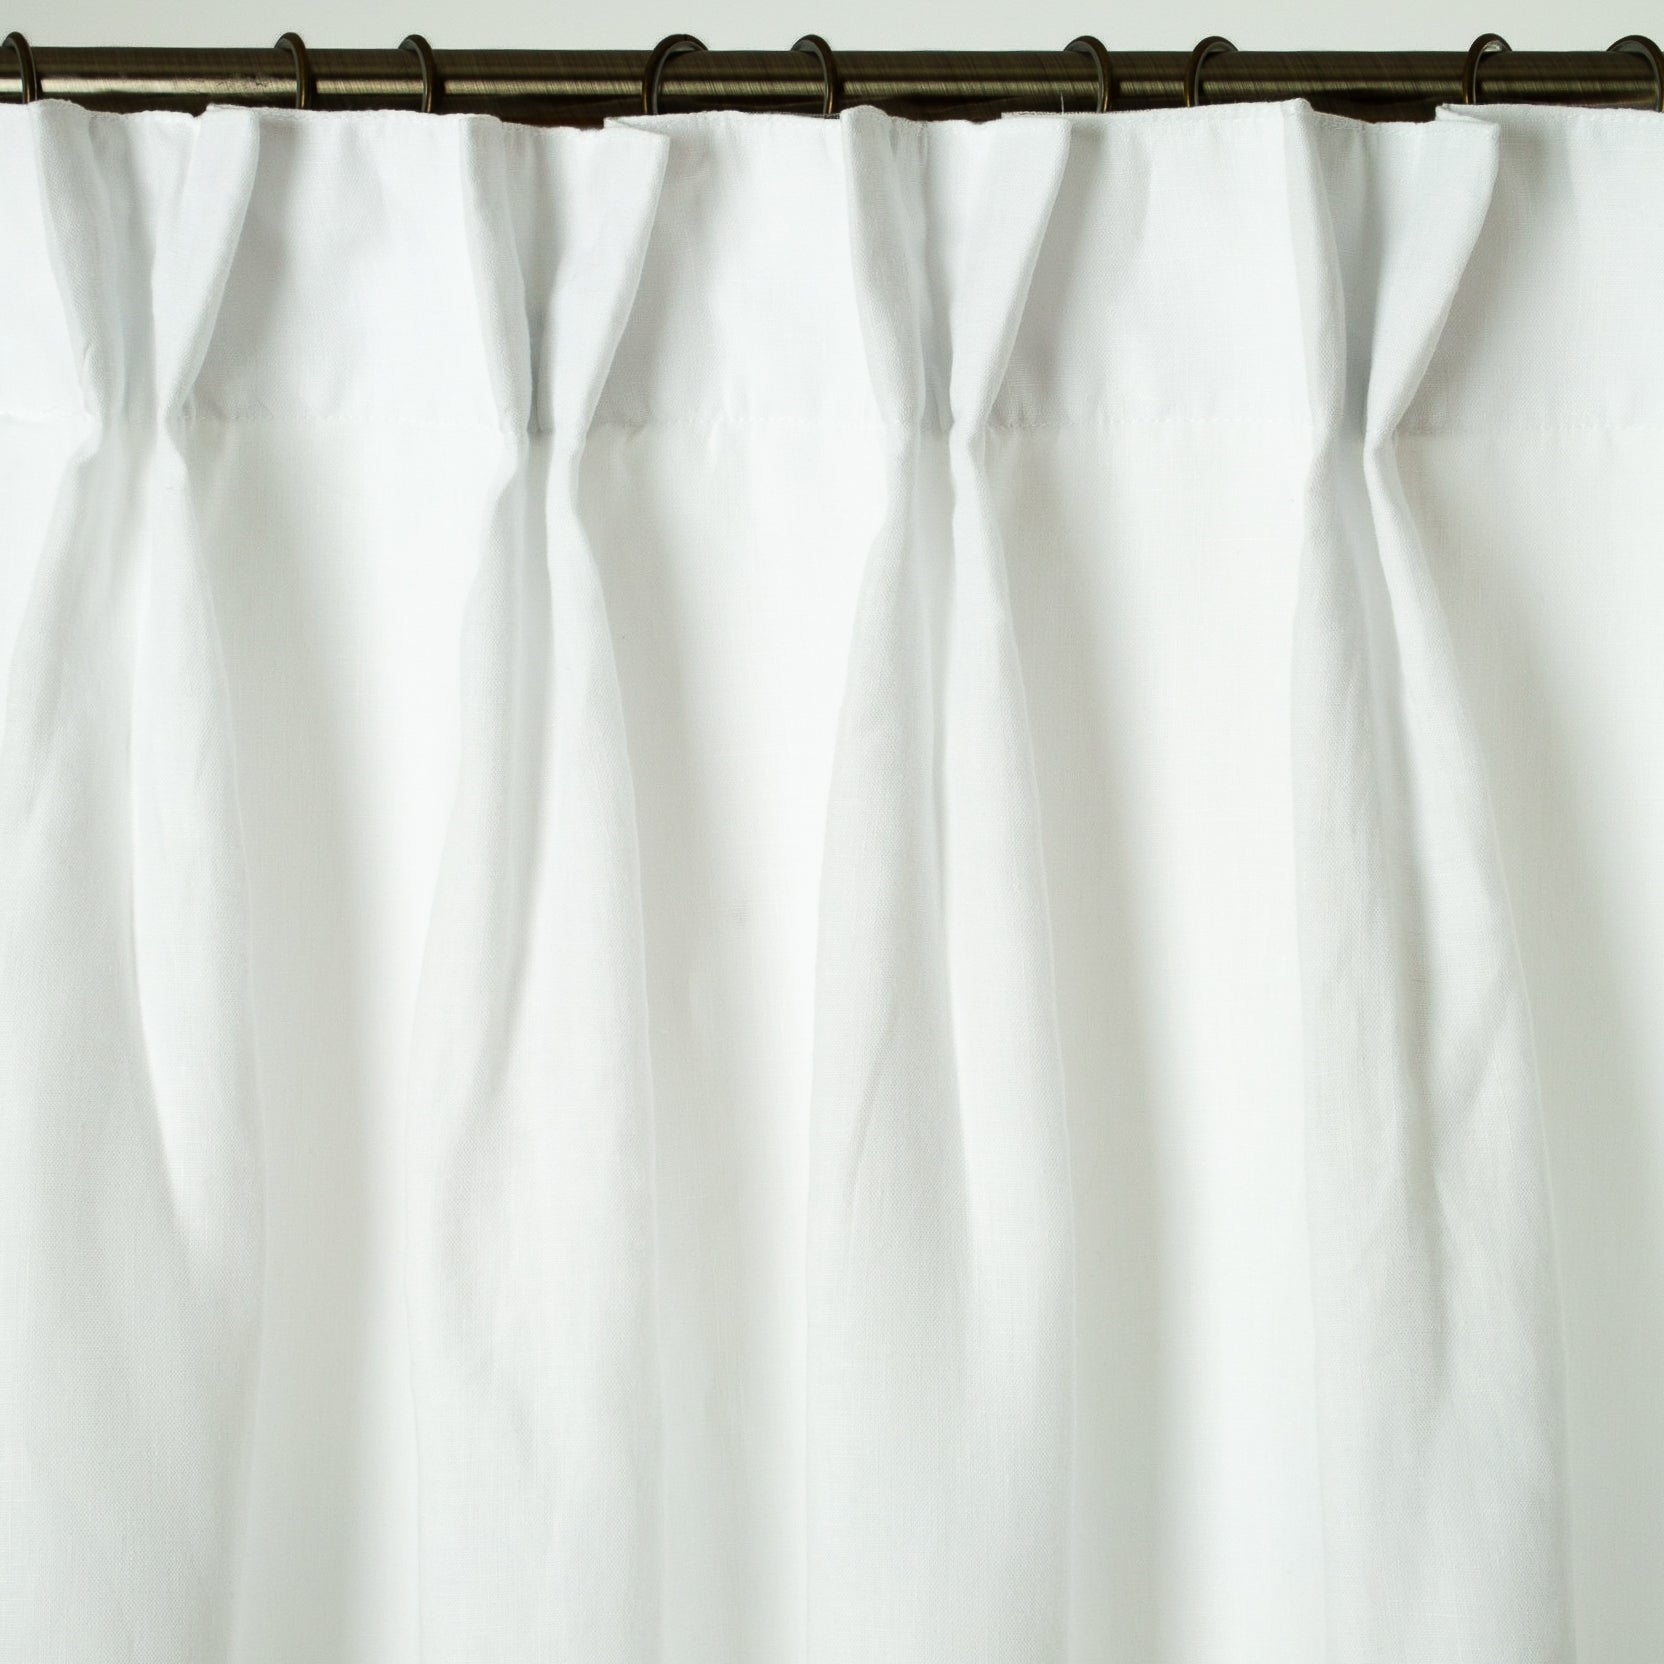 Dutch Pleat Linen Curtain Panel with Blackout Lining - Heading for Rings and Hooks - Lined Linen Darkening Curtain